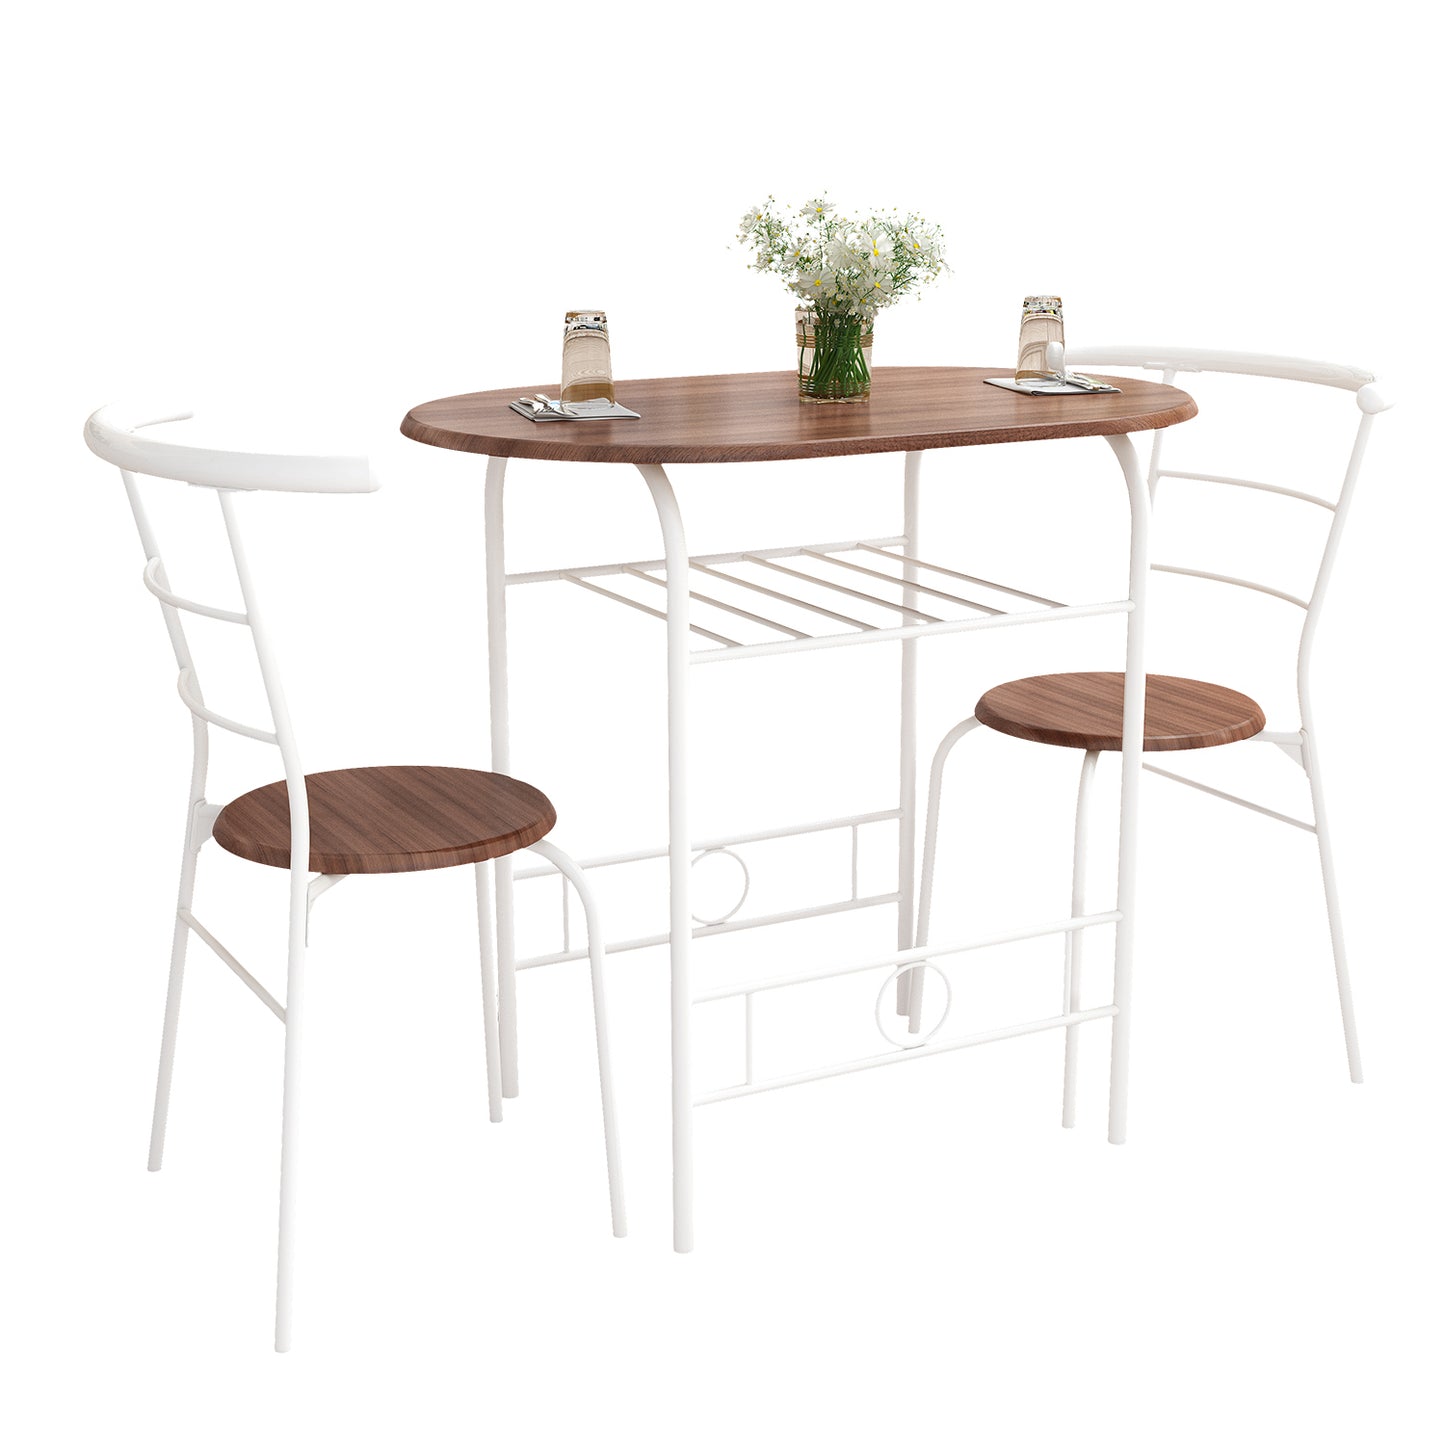 Space Saving Table Set Round Bistro Table Set Kitchen Rack Table and Wooden Chairs for Small Spaces Outdoor bar Table and Chairs Set, Brown & White, one set of three pcs, Dark Brown